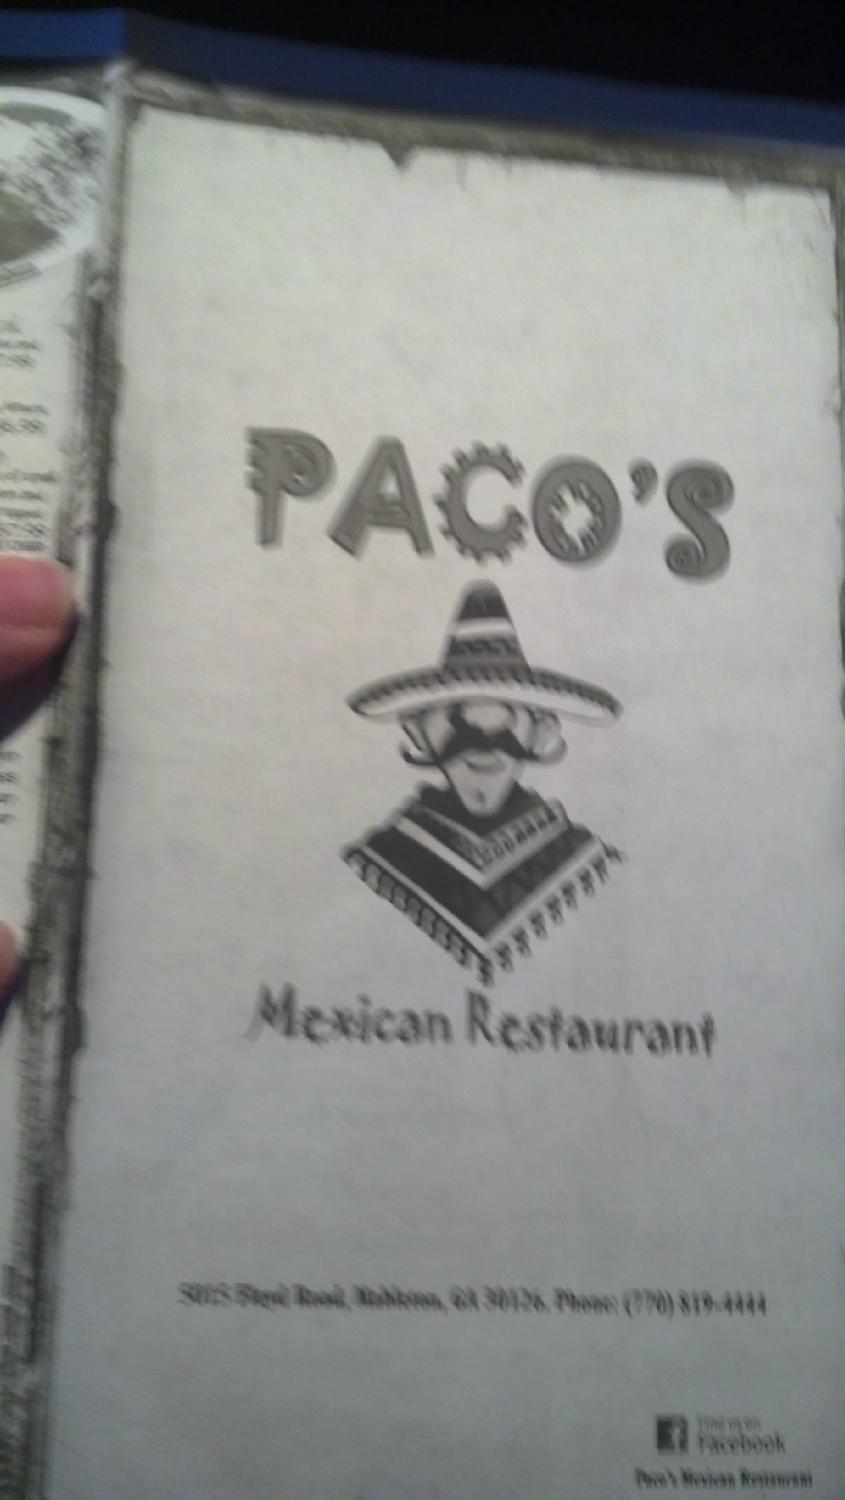 Pacos Mexican Restaurant